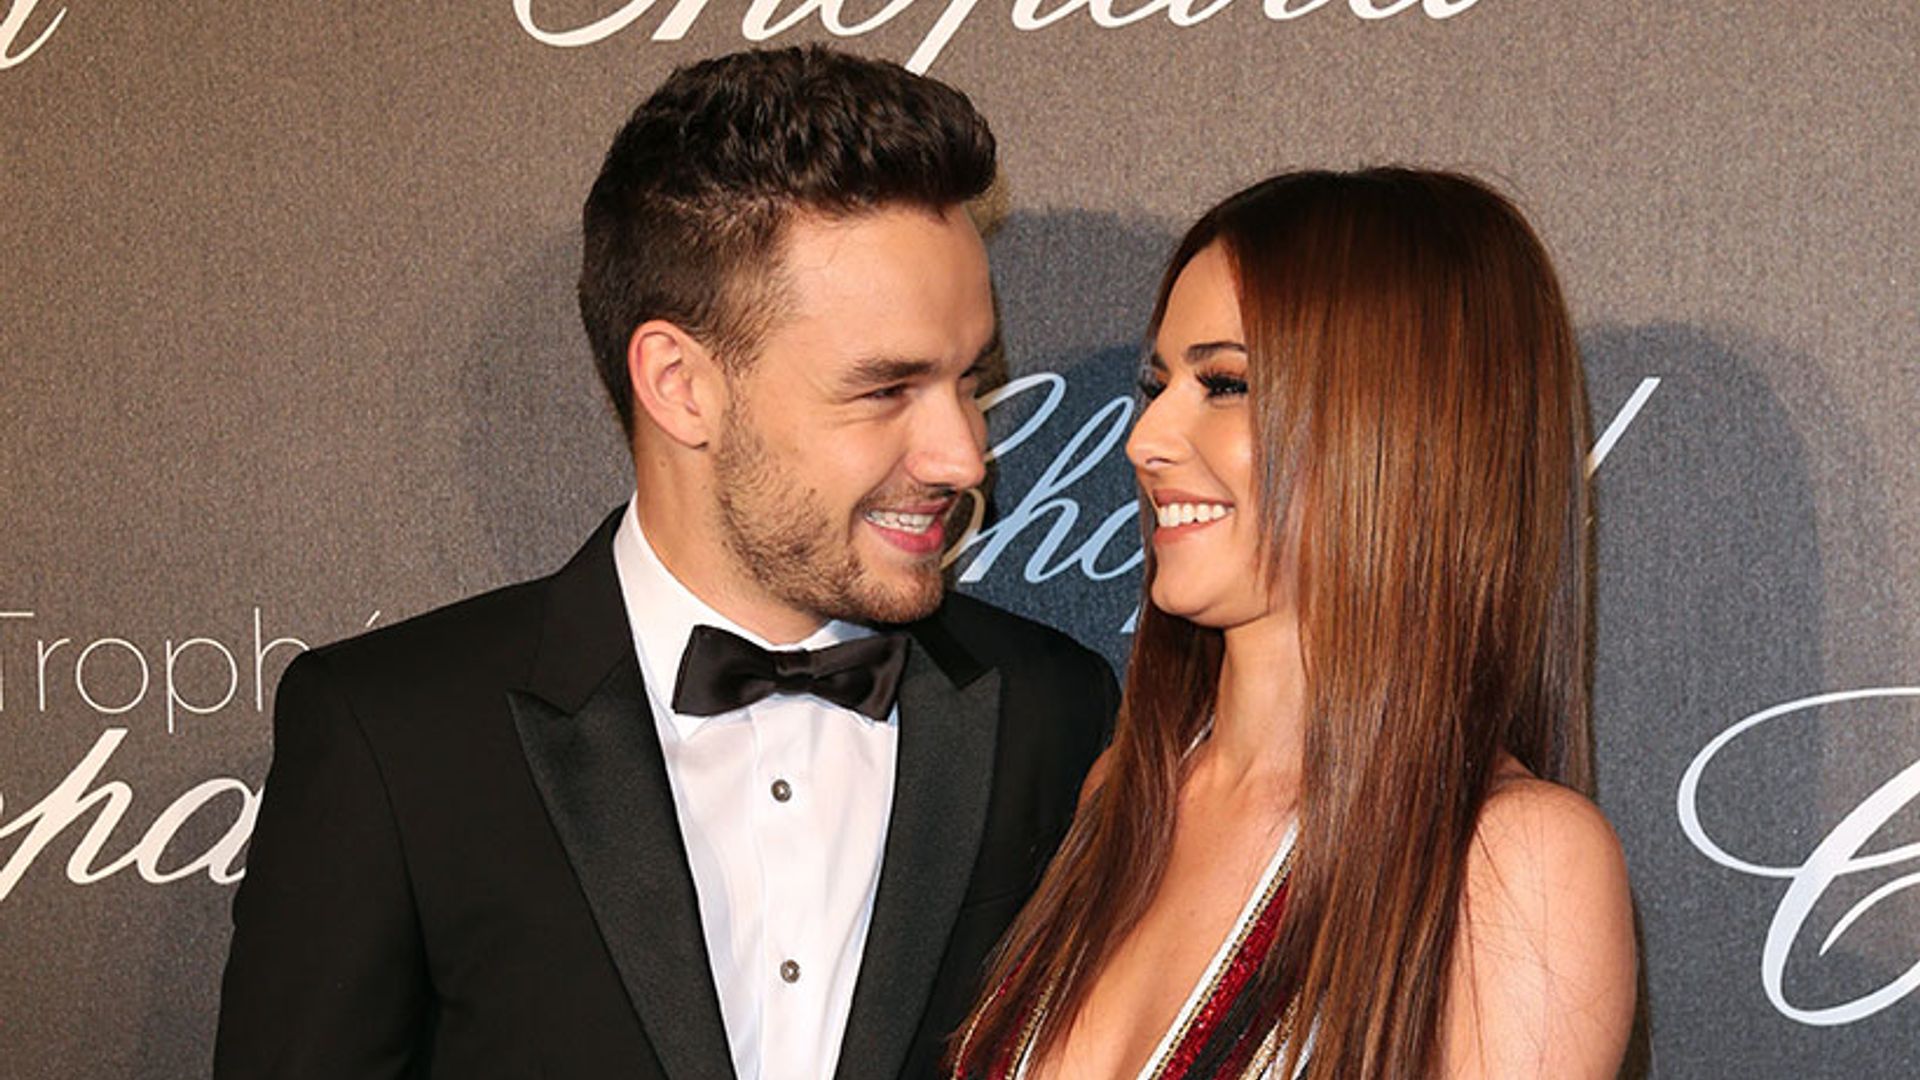 Cheryl was 'very upset' about Liam Payne leaving